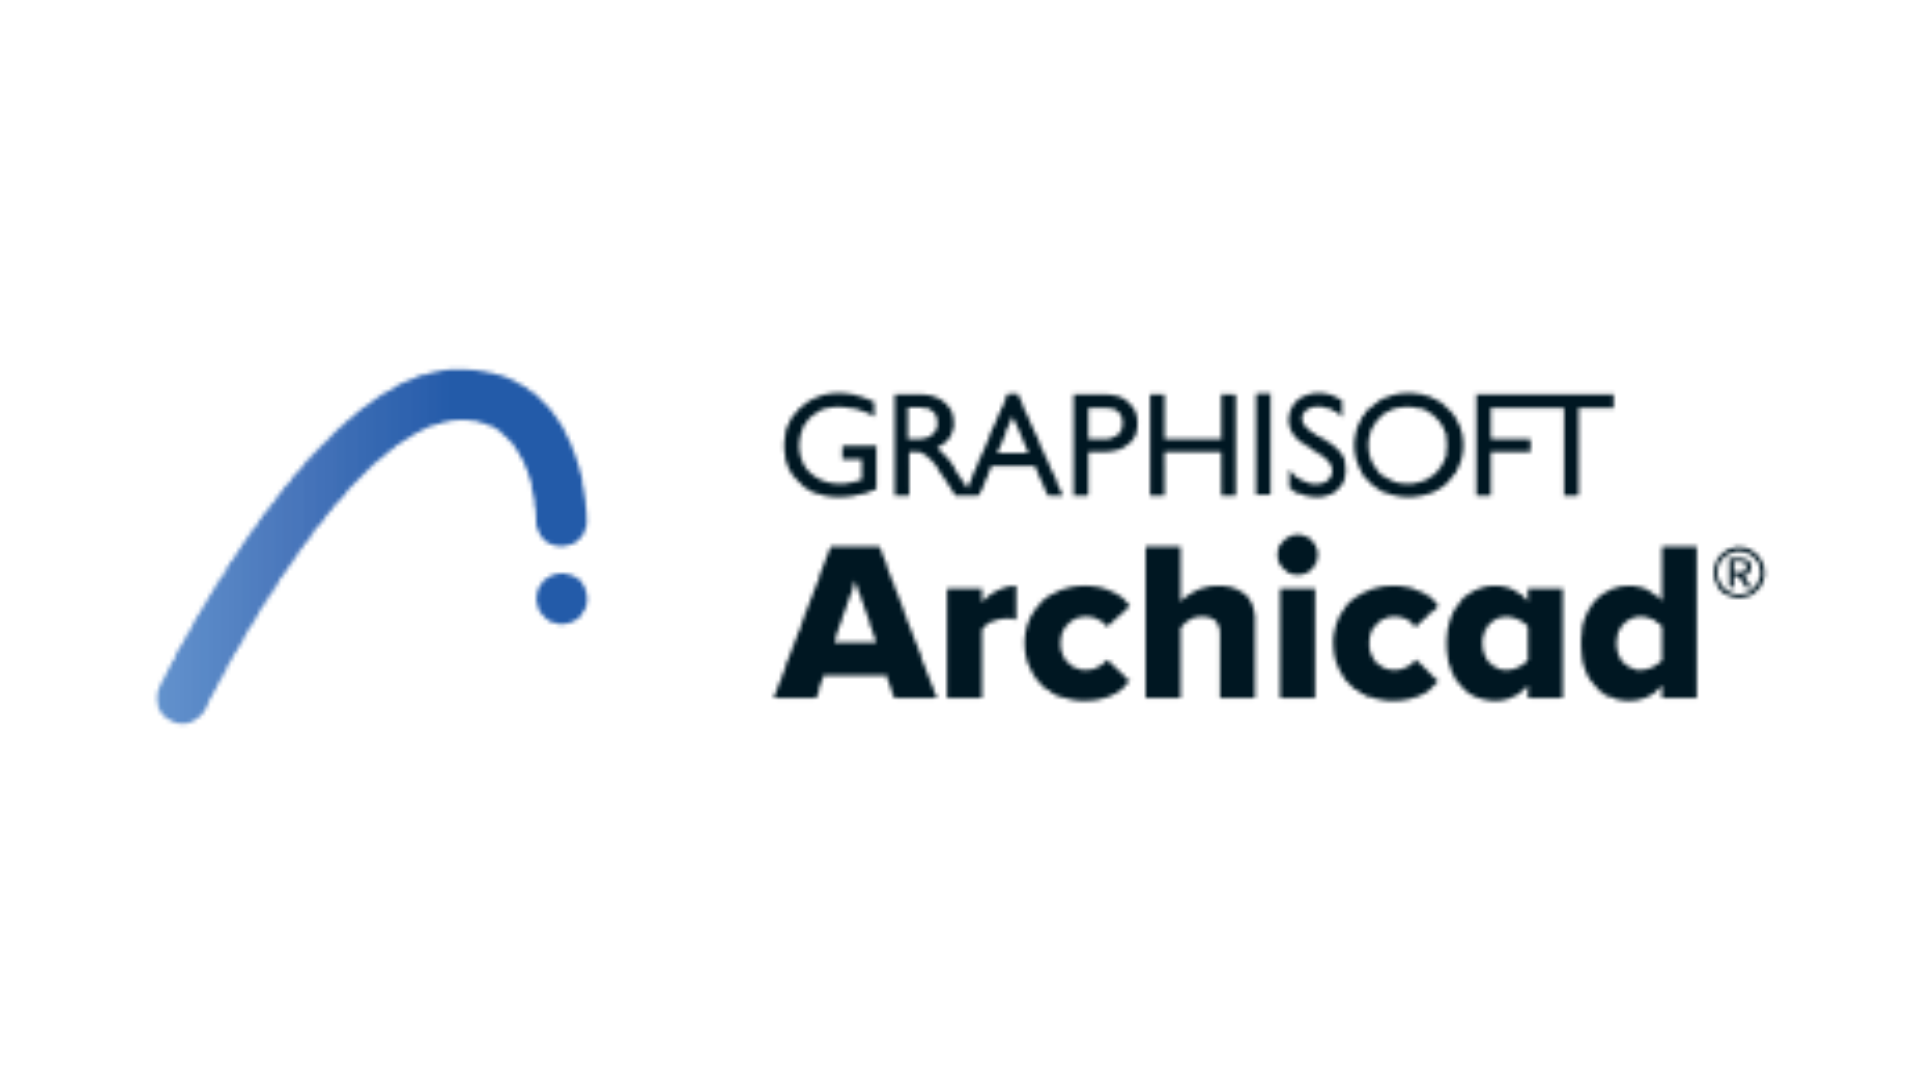 Logo of Archicad - a design software that can integrate with Catenda Hub